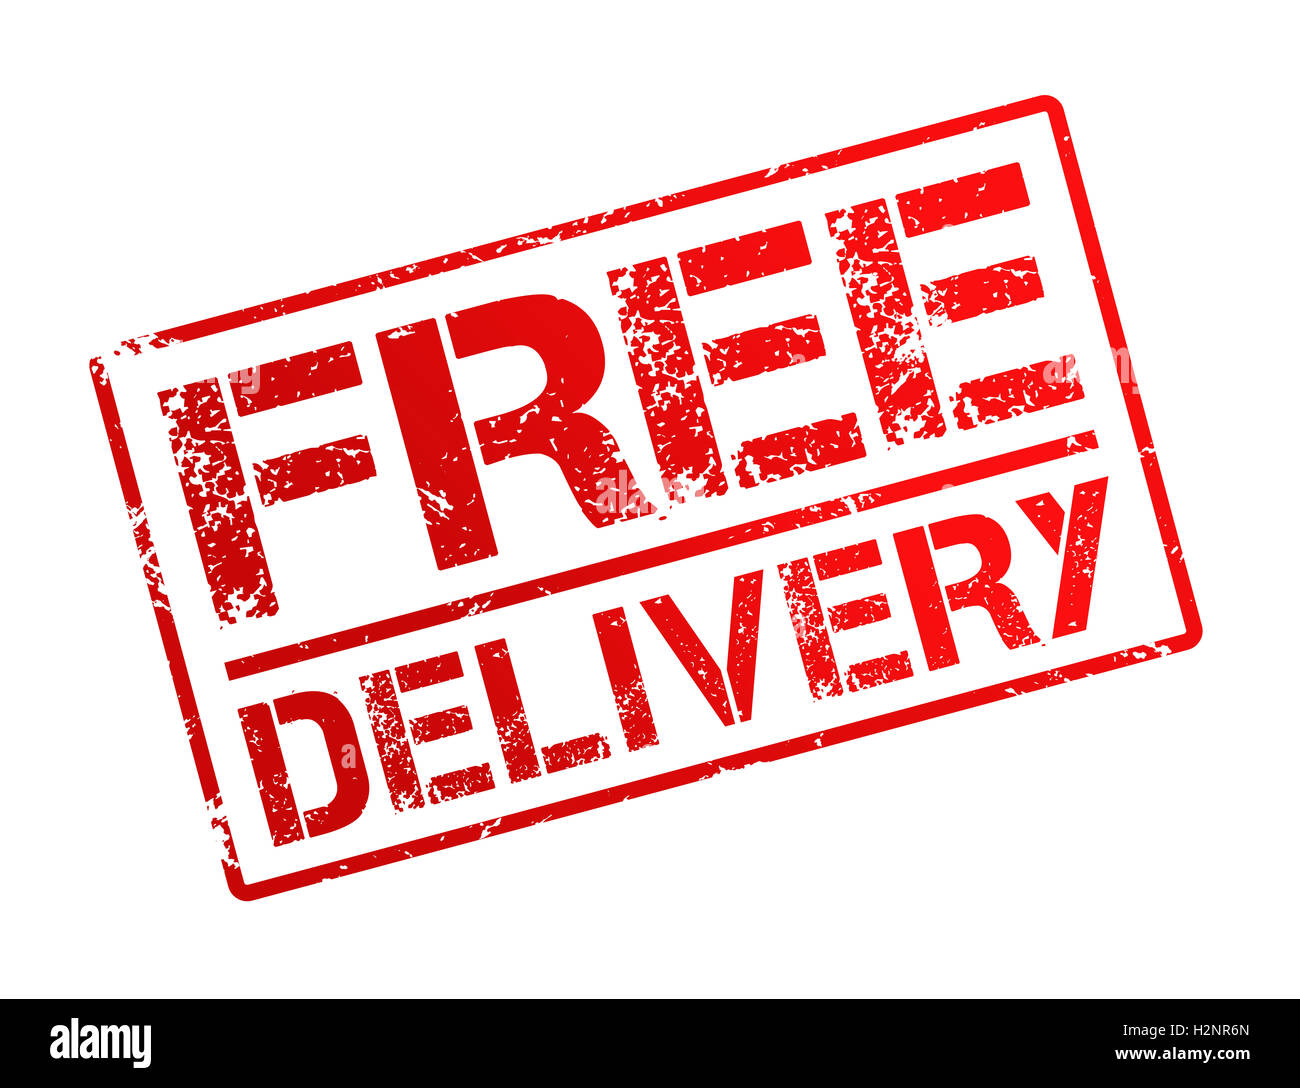 free delivery rubber stamp illustration Stock Photo - Alamy